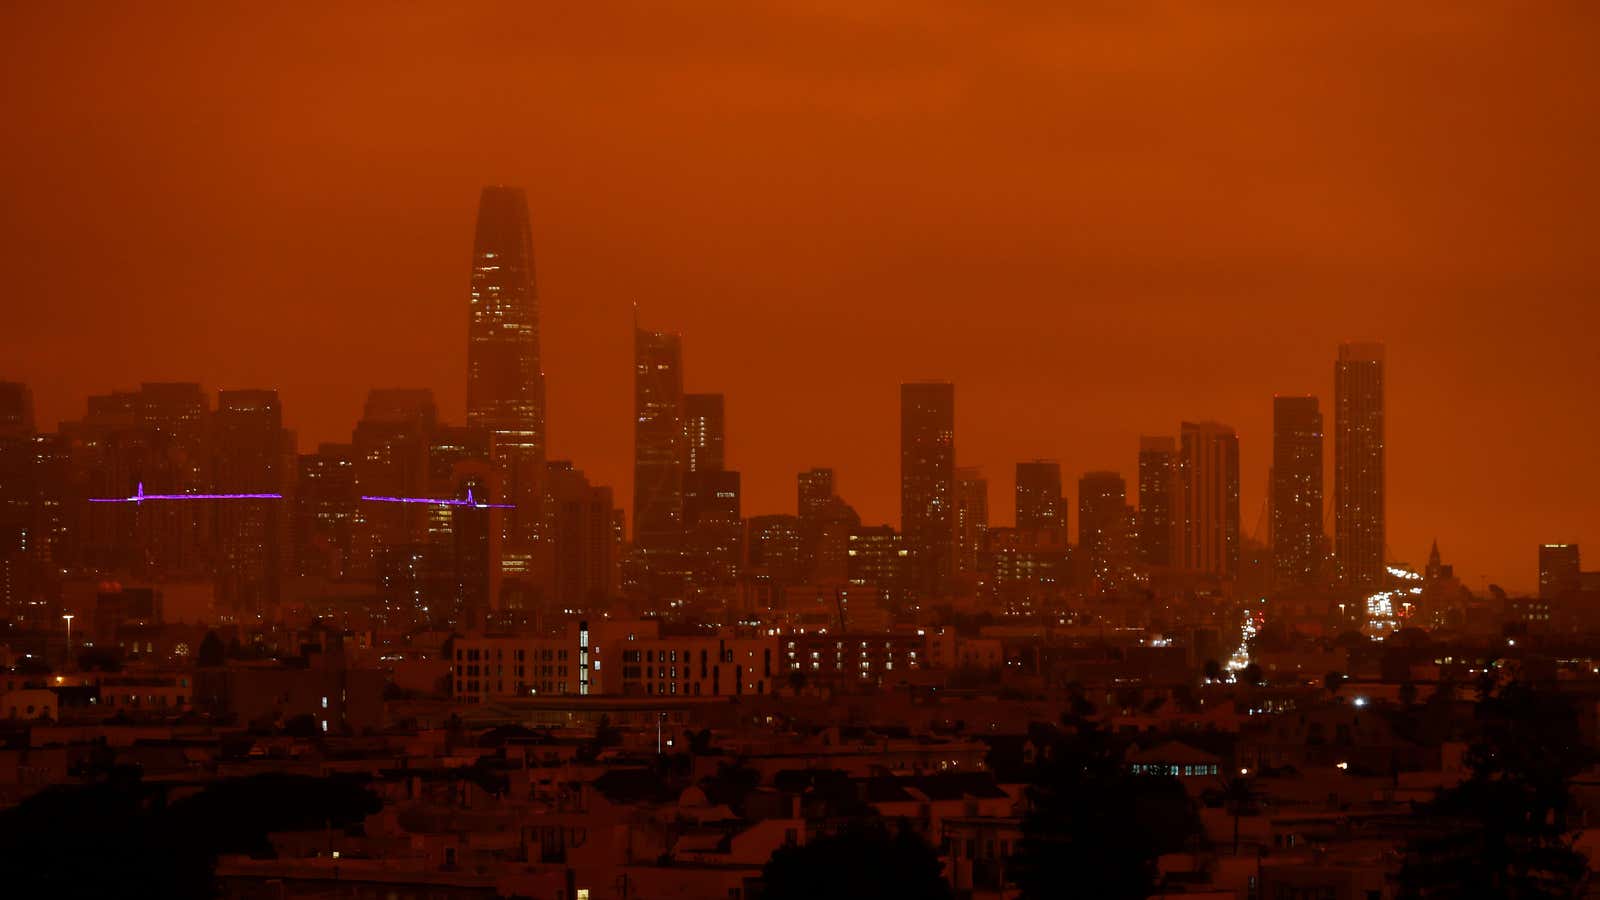 On Sept. 9, 2020, downtown San Francisco was under an orange sky darkened by smoke from California wildfires.